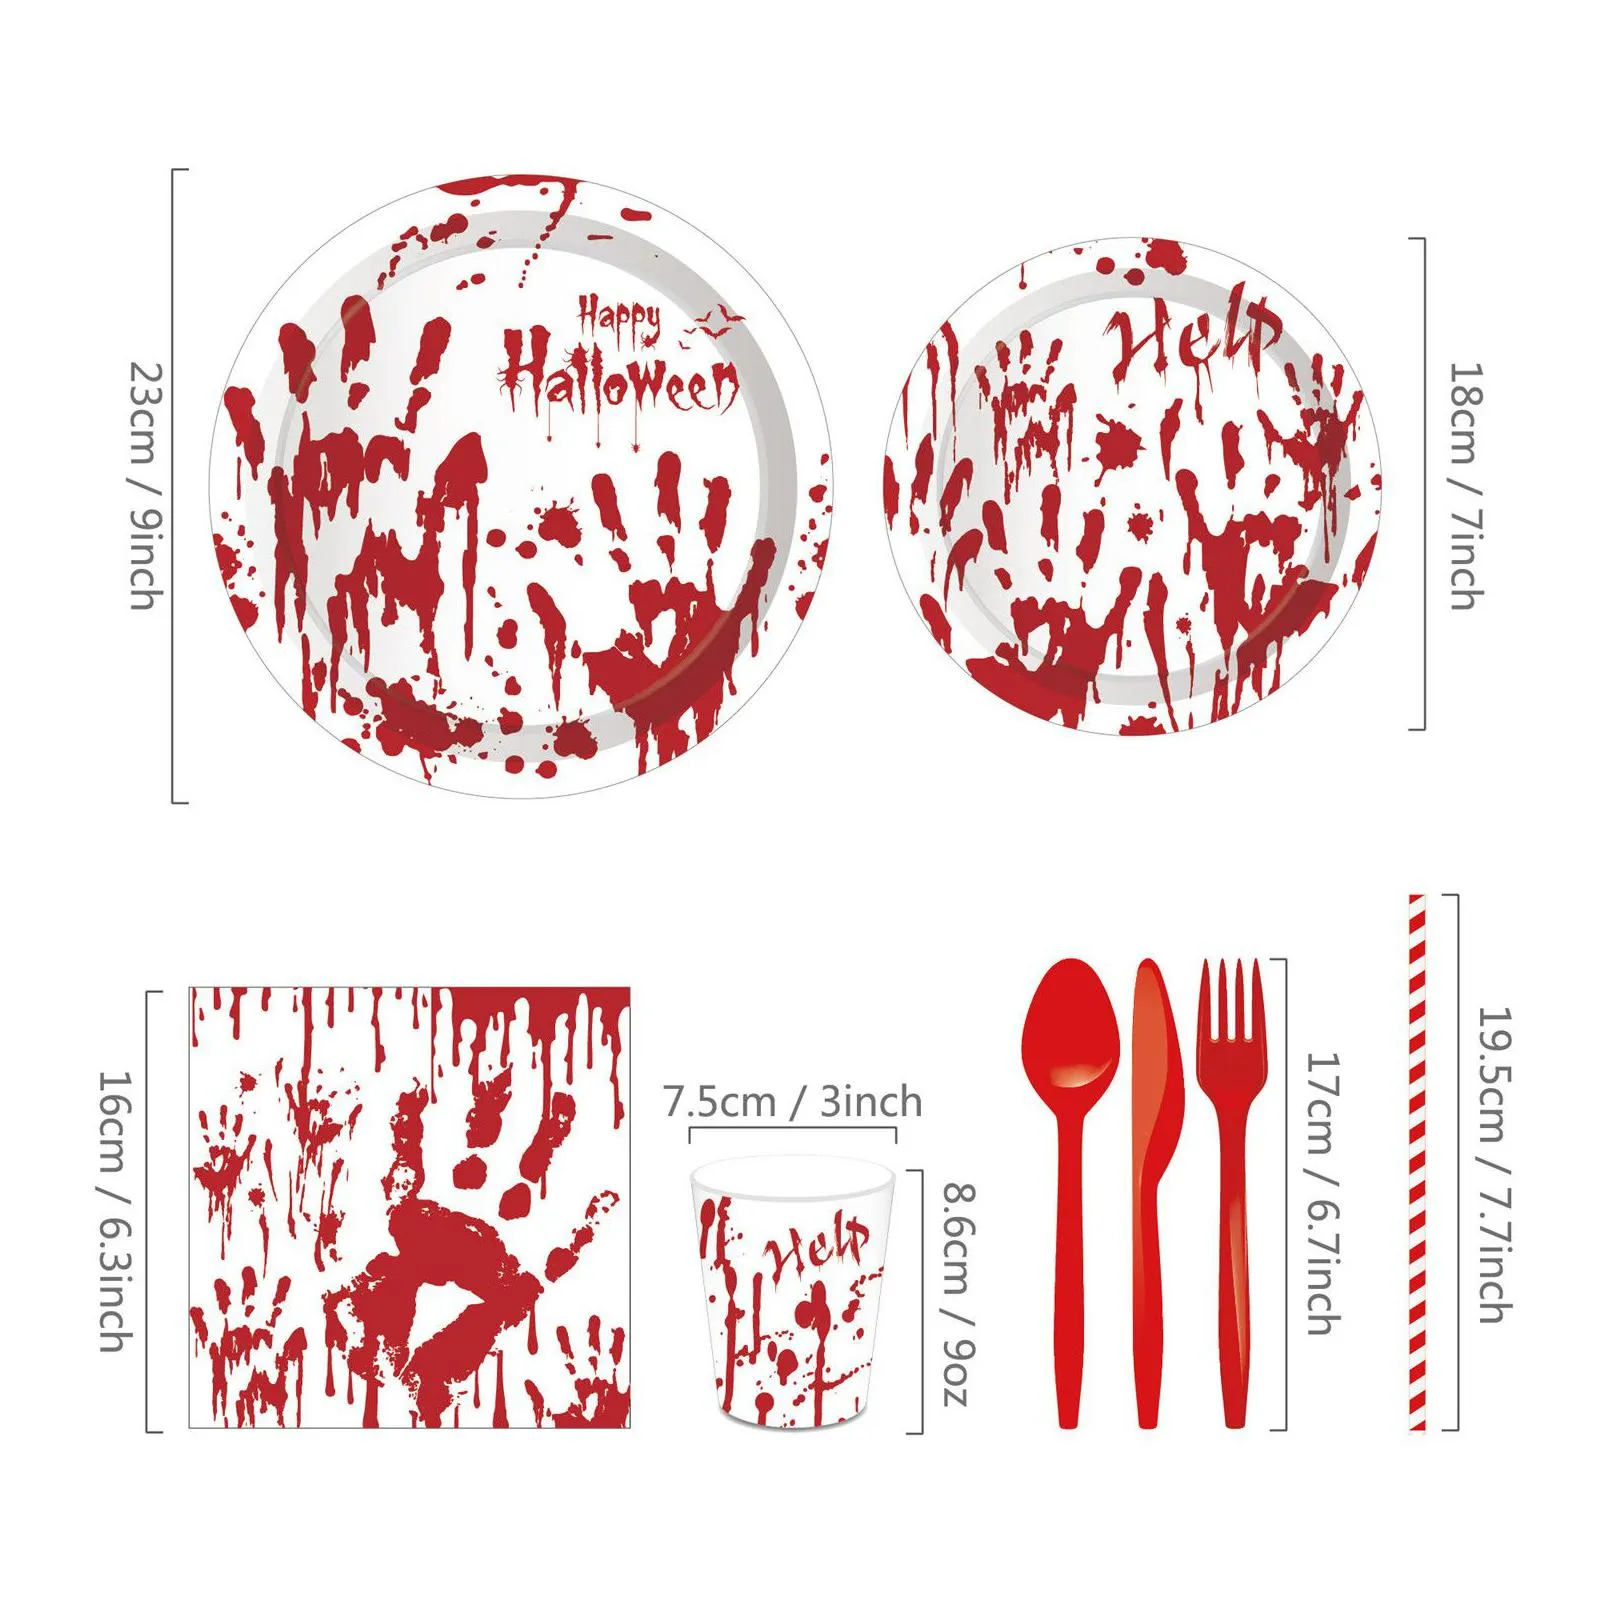 halloween blood hand bleeding paper plates party supplie plates and napkins birthday set party dinnerware serves 8 guests for plates, napkins, cups